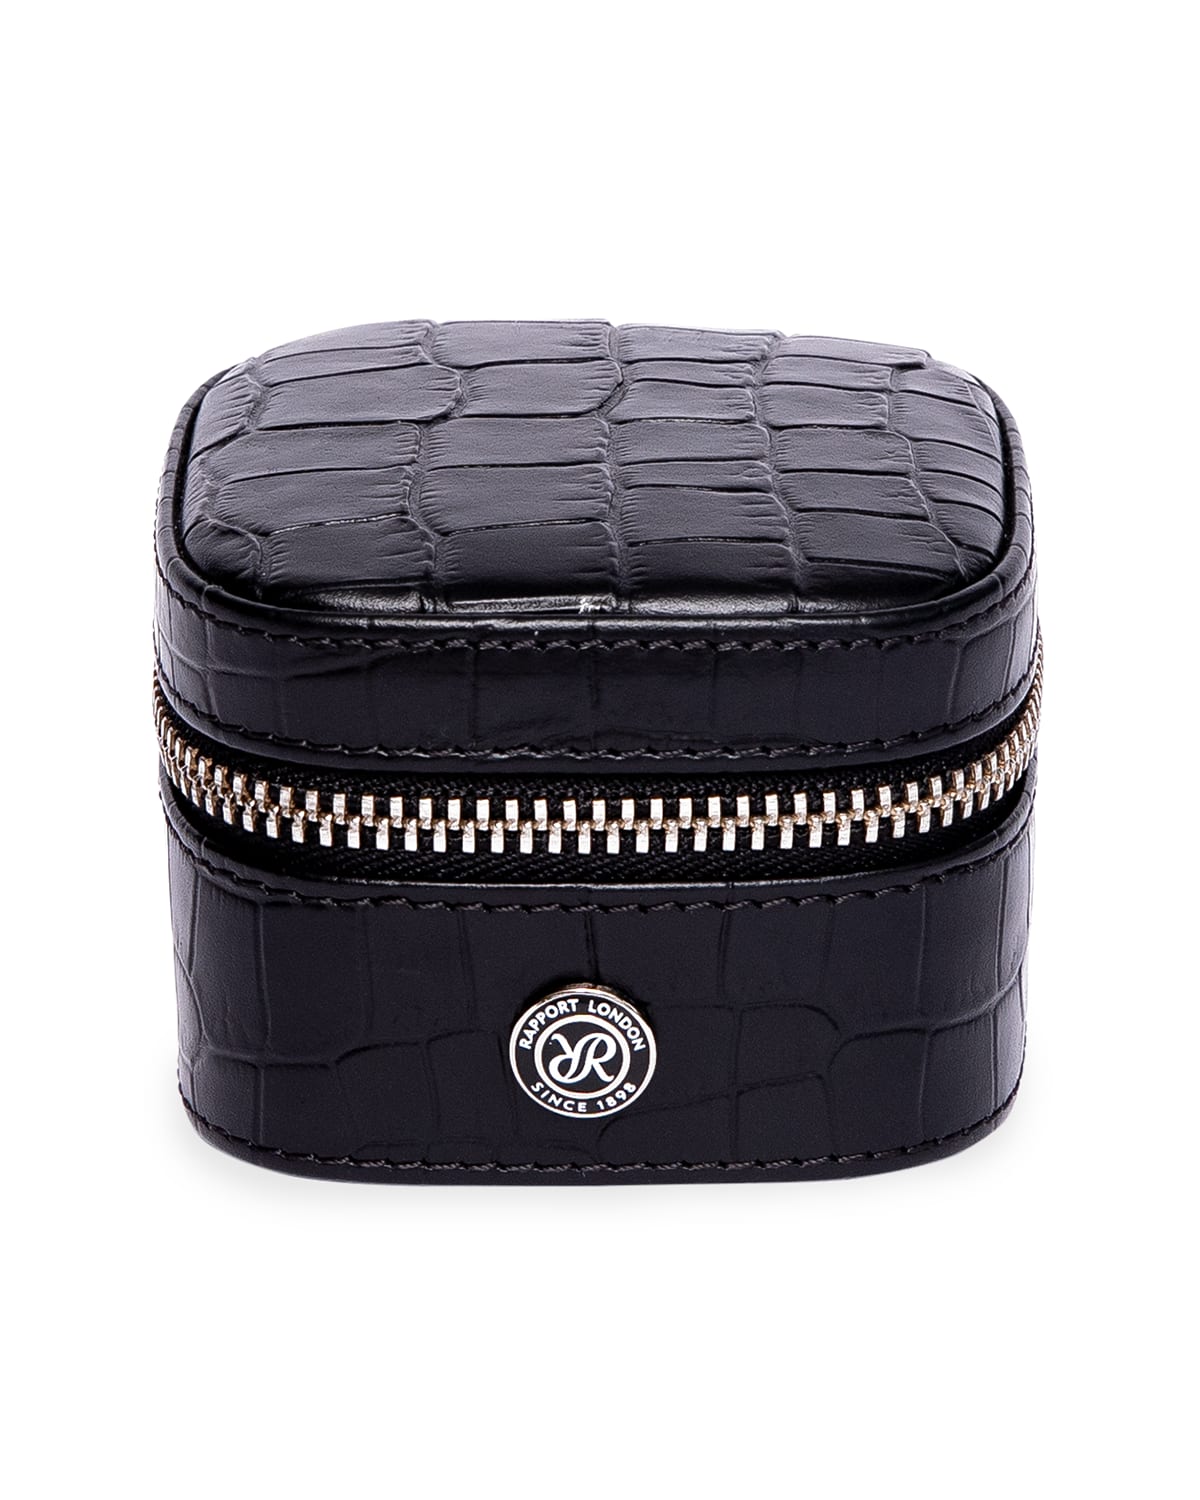 Rapport Stud Box In Black Leather